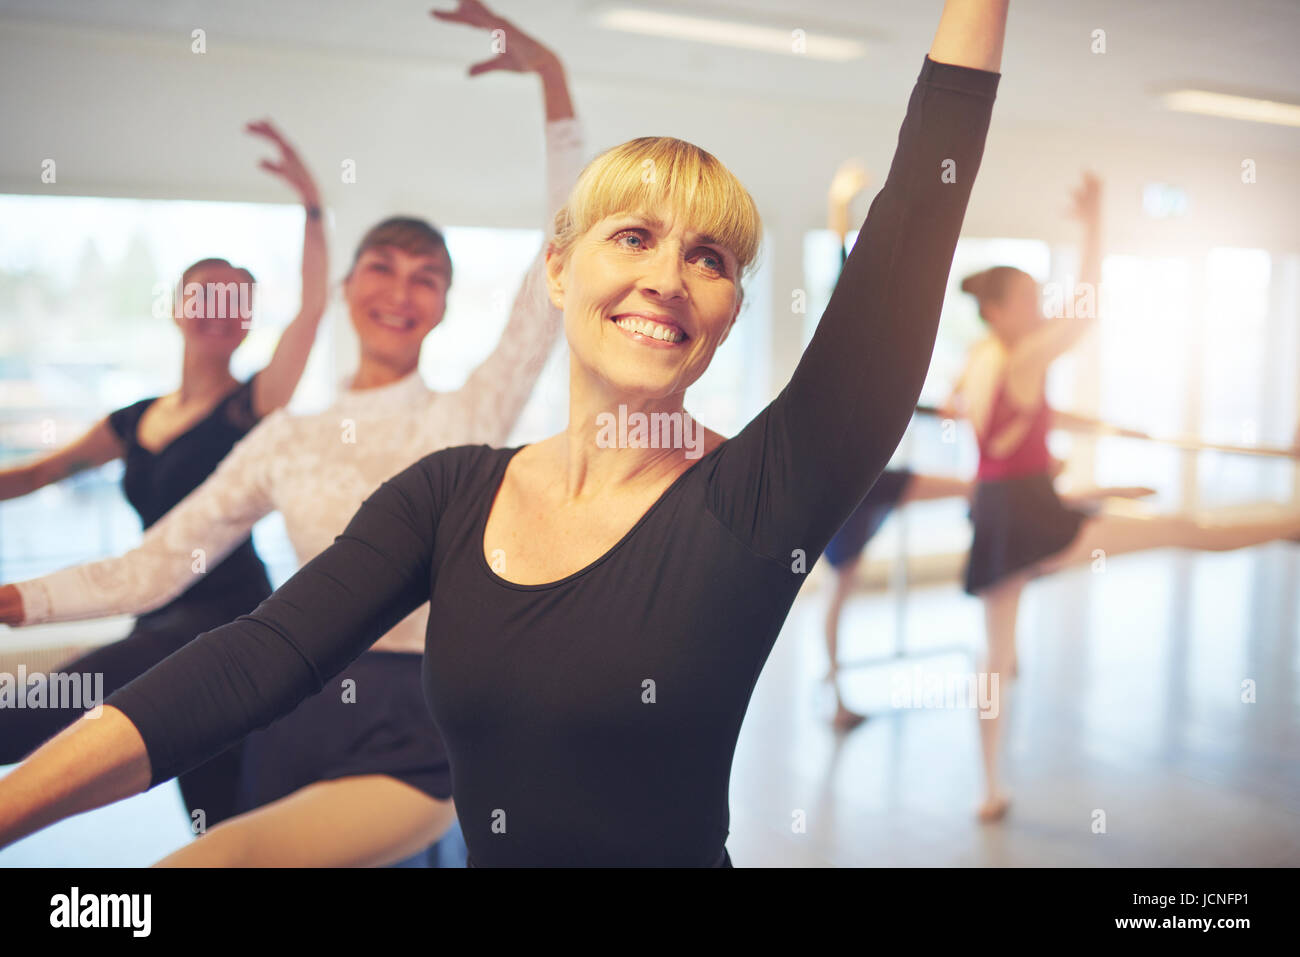 Cheerful smiling adult ballerina stretching with hand up performing a dance in ballet class. Stock Photo